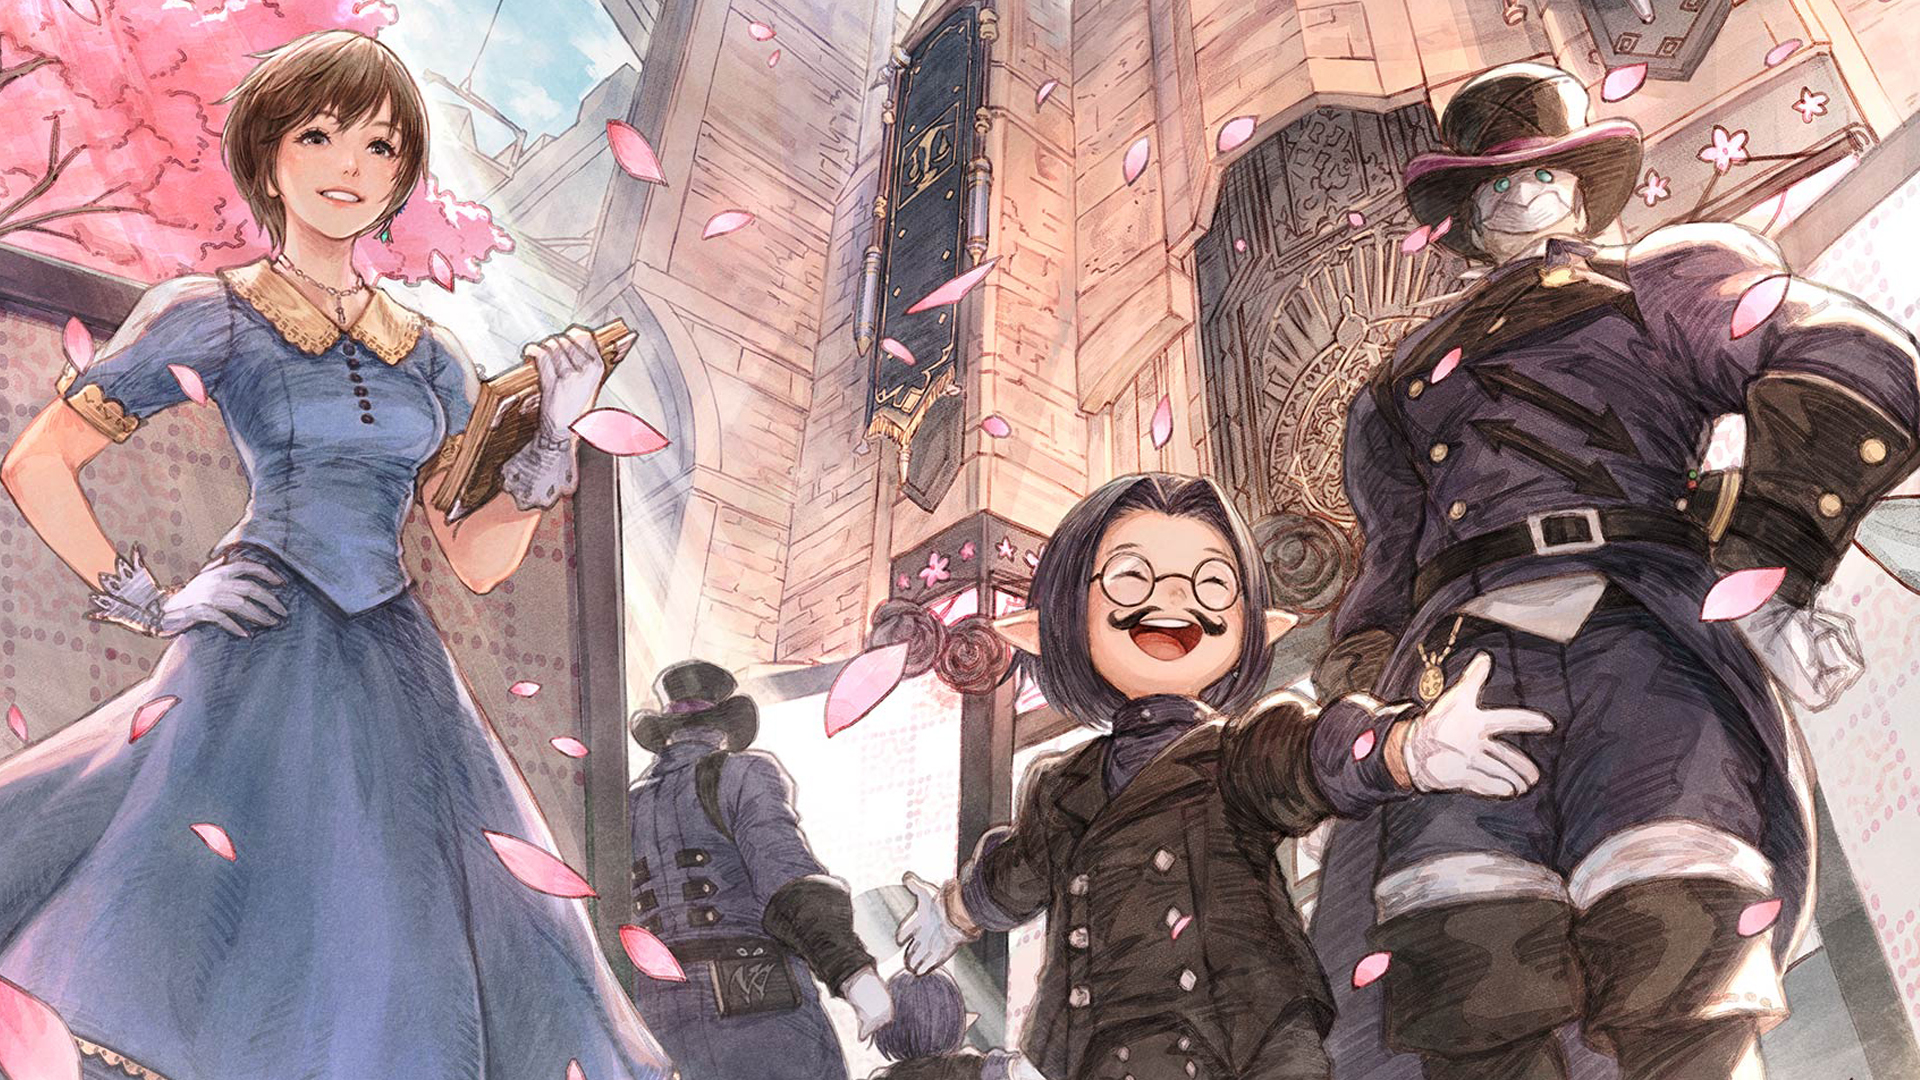 FFXIV's next event is for the Little Ladies